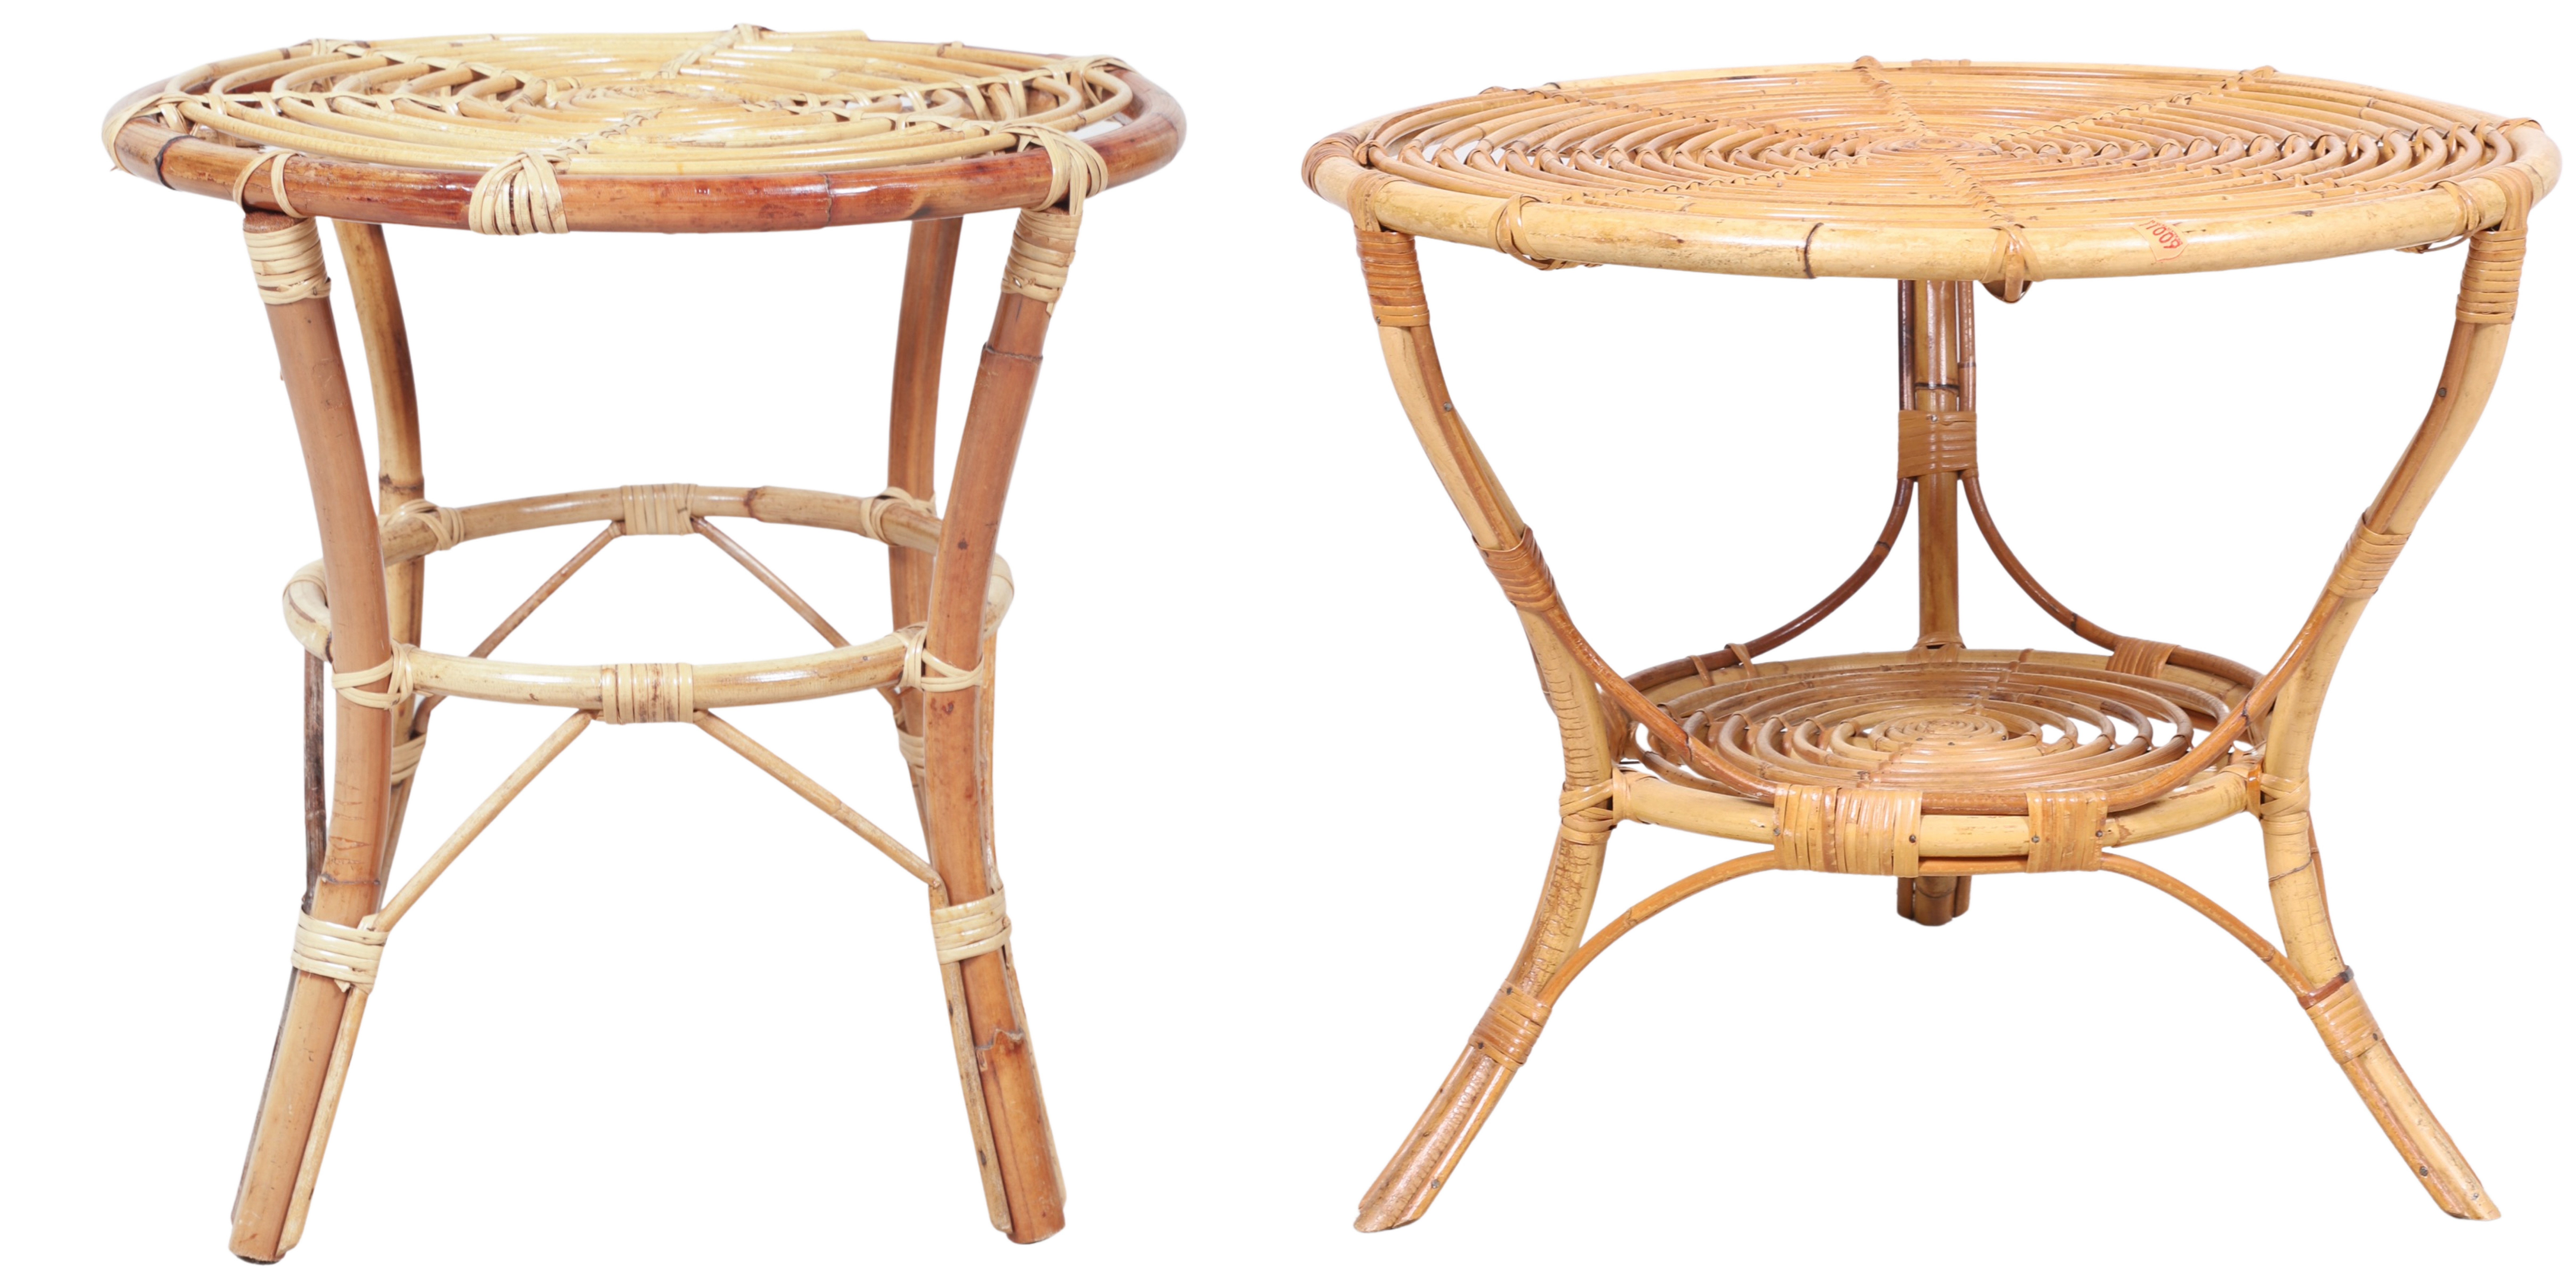 Bamboo and rattan side table, 18h x